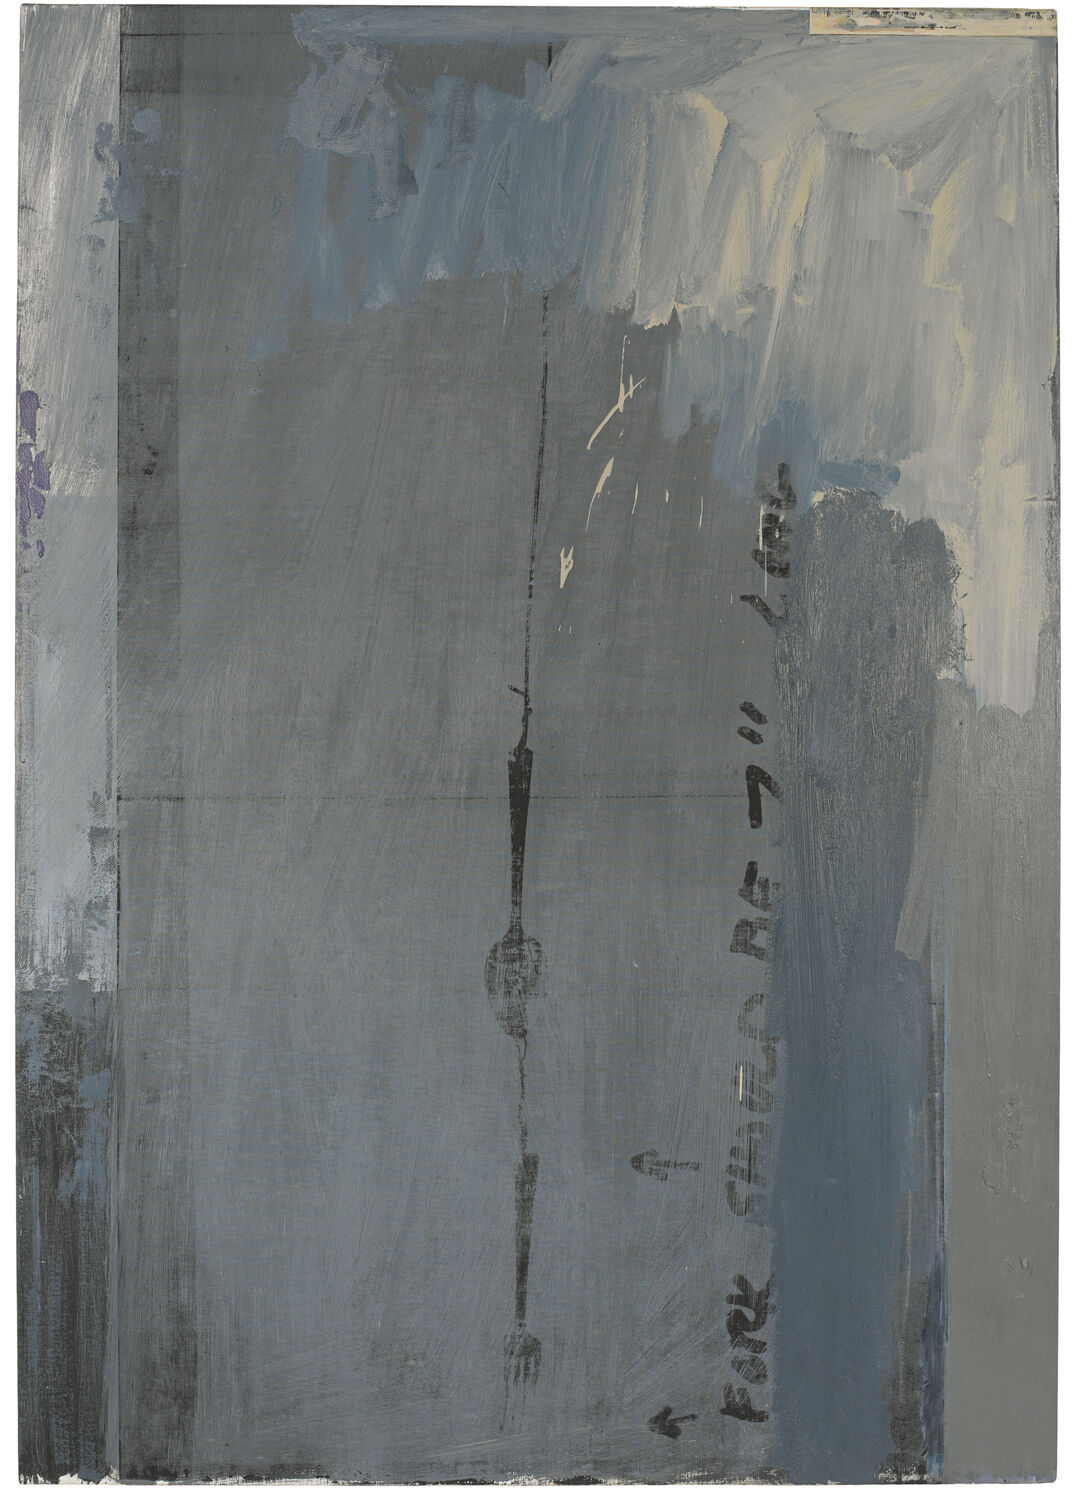 Tall rectangular composition of gray, white, and blue painterly brushstrokes, with the shadowy image of a fork and spoon suspended by string down the middle of the composition; inscription that runs vertically up the right side of the painting, pointing to the central image with two arrows, reads "FORK SHOULD BE 7" LONG".